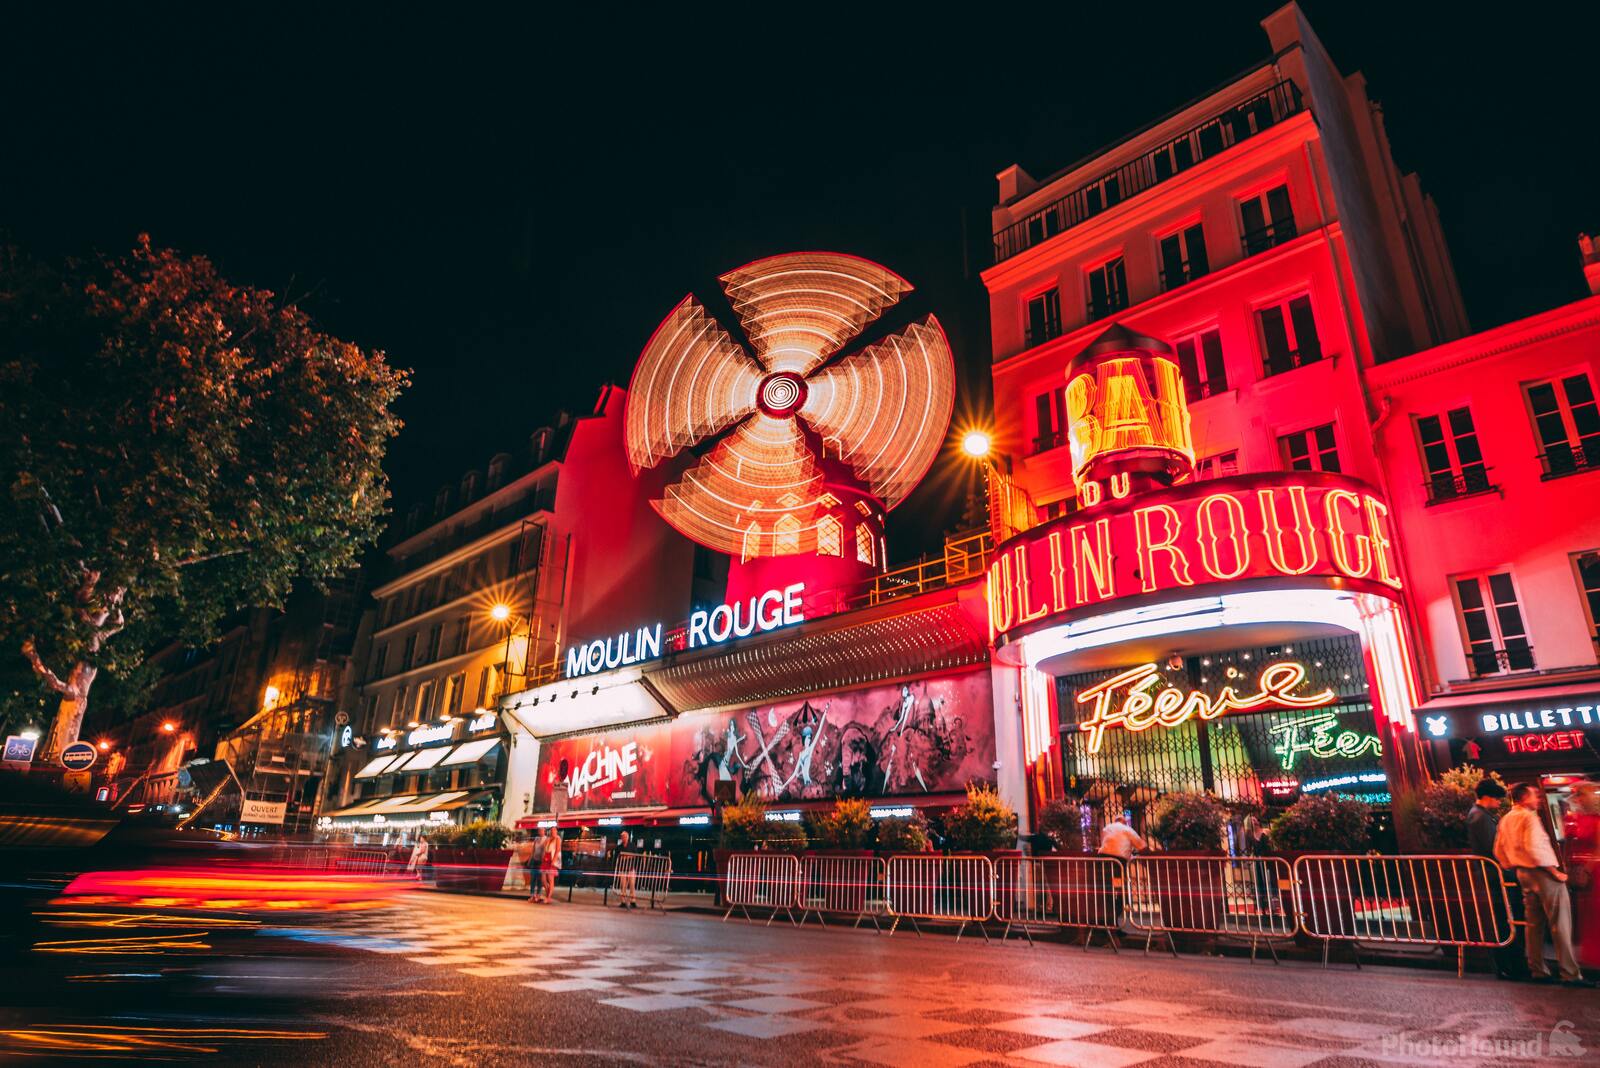 Image of Moulin Rouge by Team PhotoHound